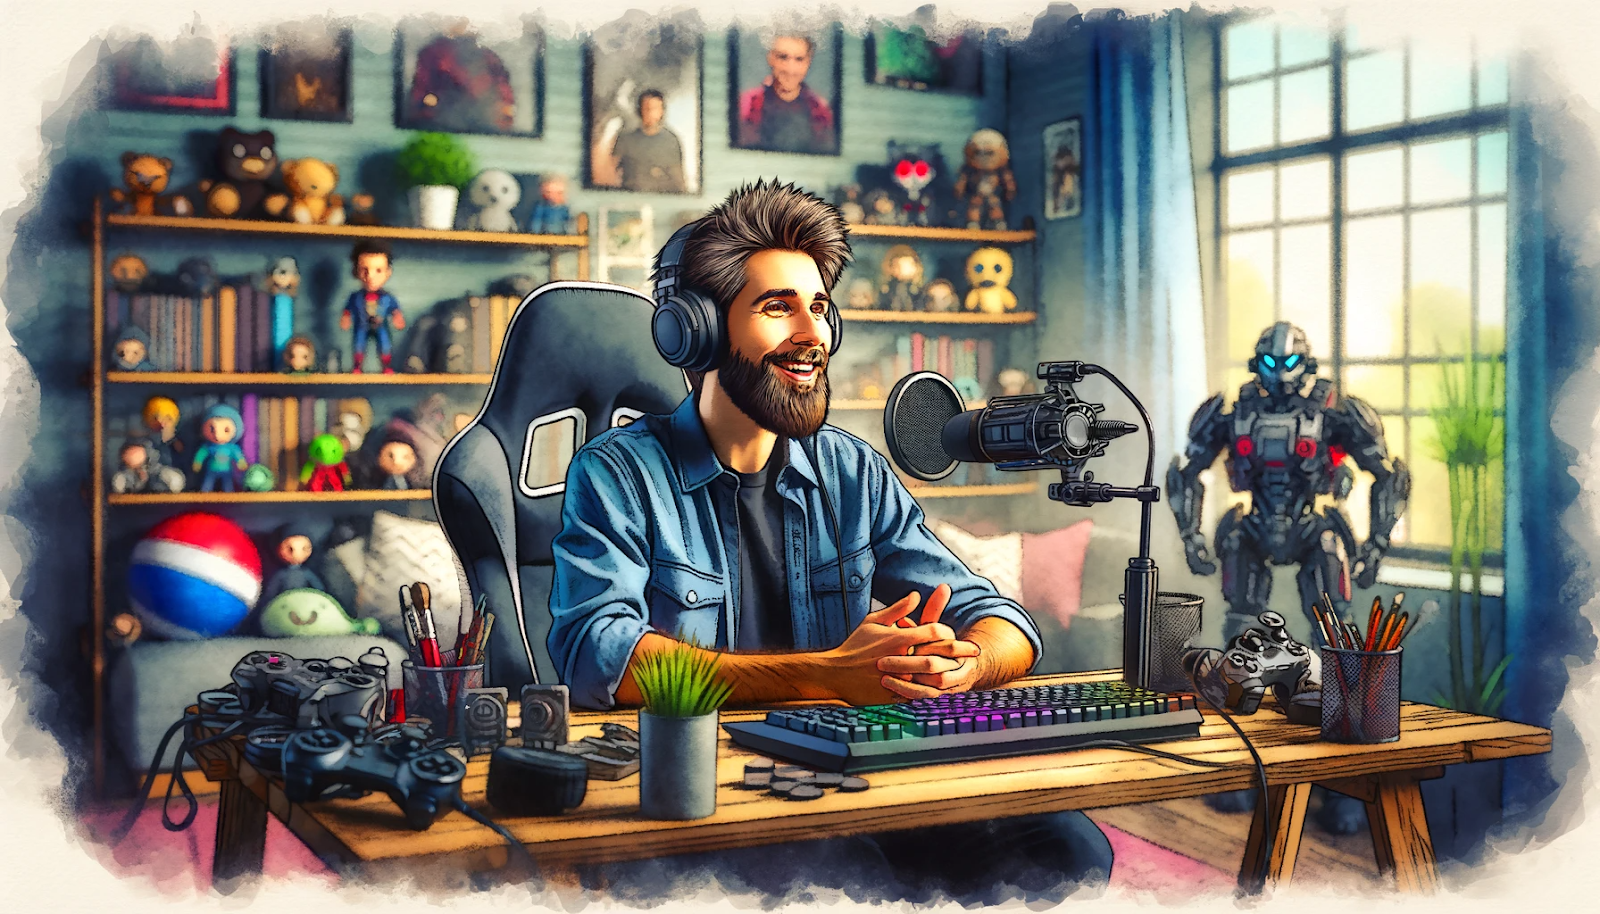 A content creator recording a game review in a well-equipped gaming room, complete with gaming paraphernalia like headsets, keyboards, and action figures in the background.